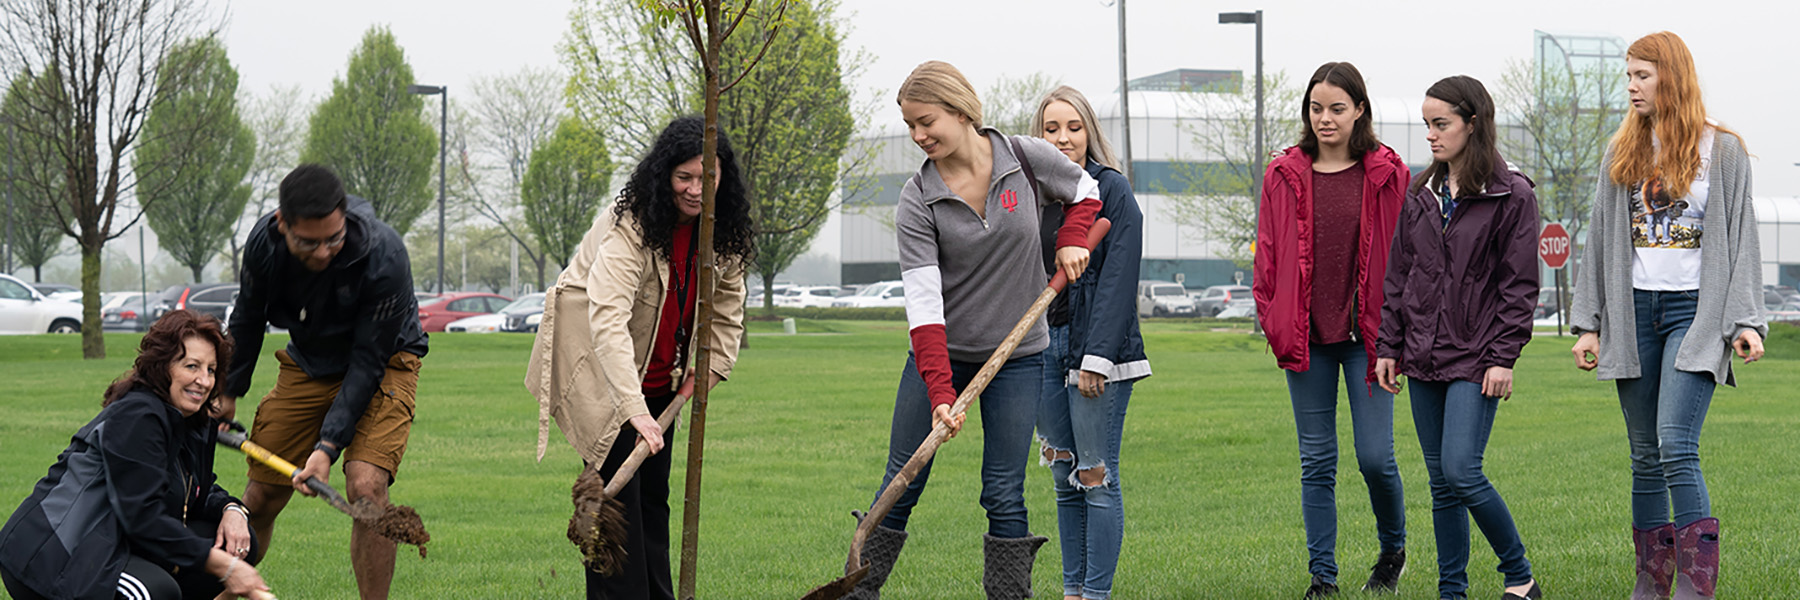 photo of students and faculty planting trees on campus.